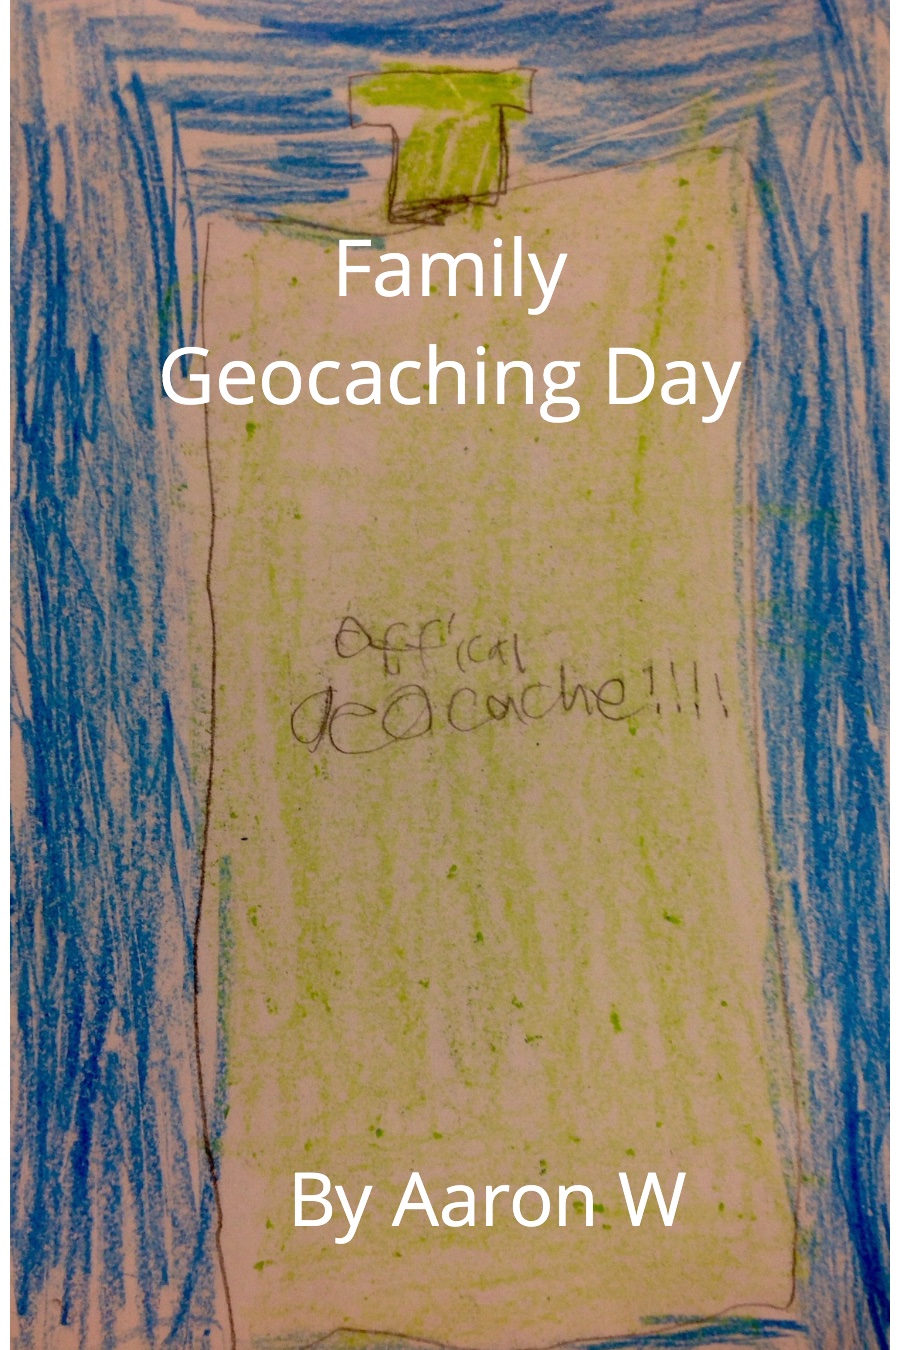 Family Geocaching Day by Aaron W (1)